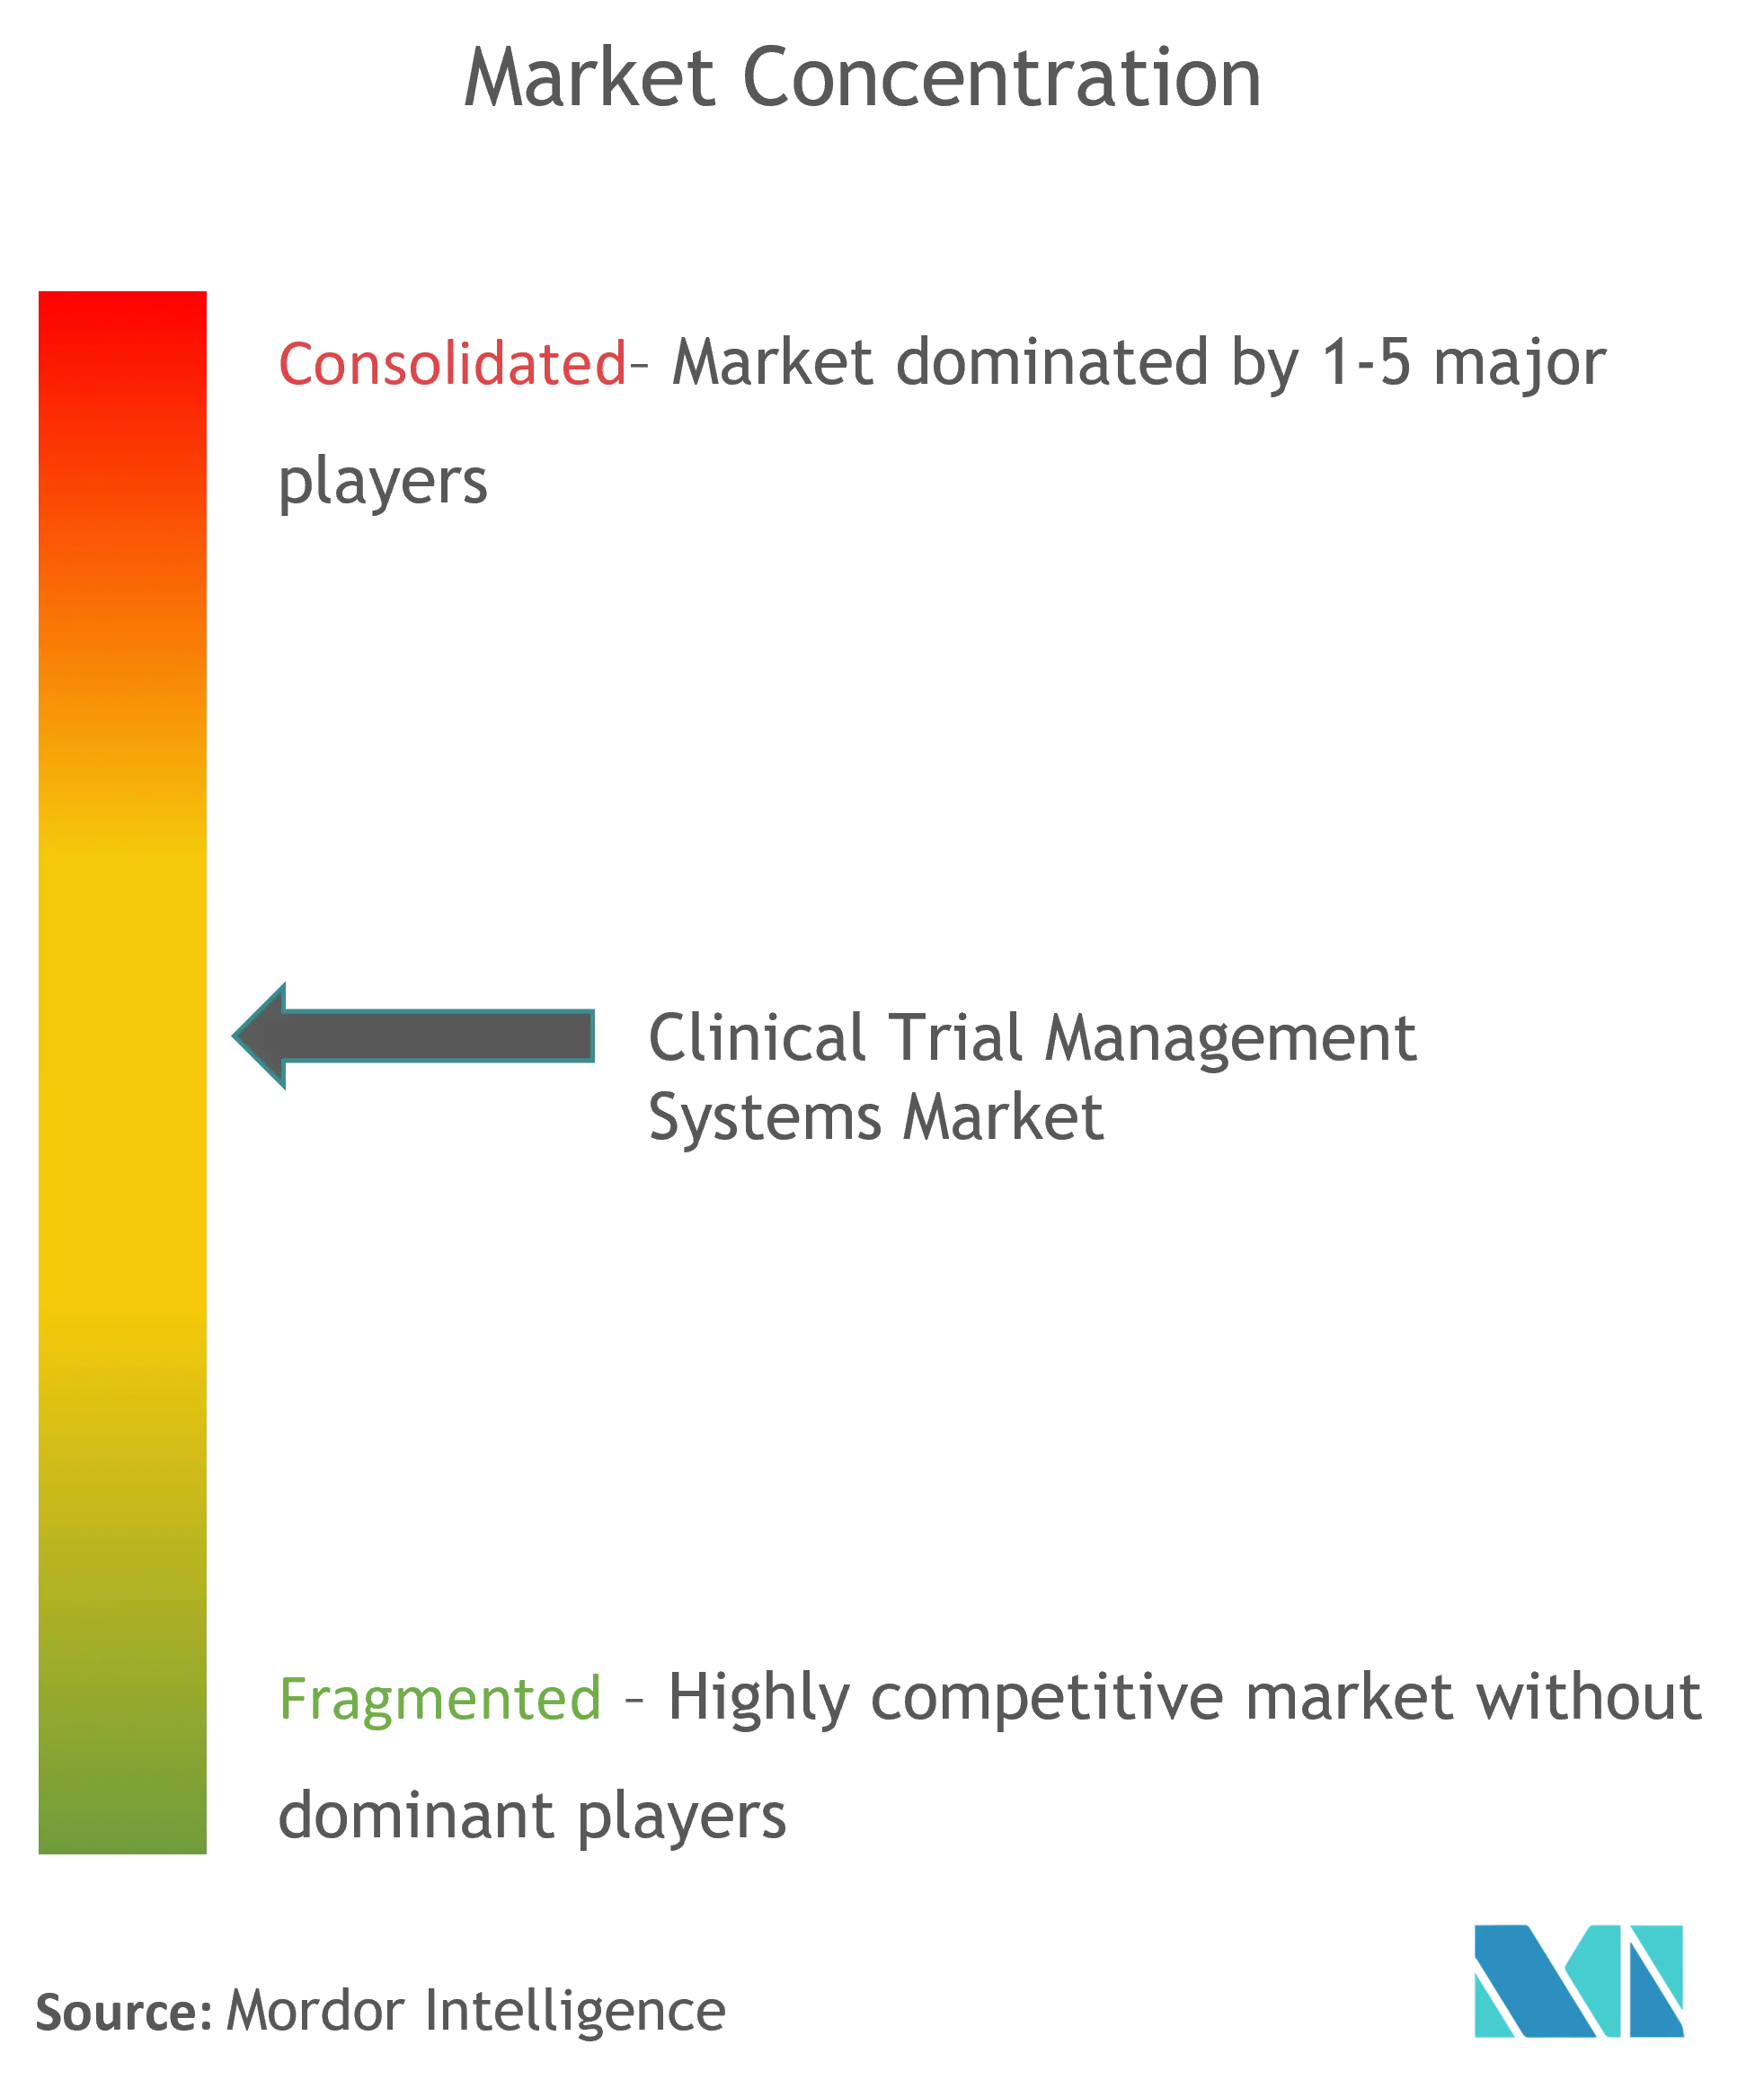 Clinical Trial Management Systems Market concentration